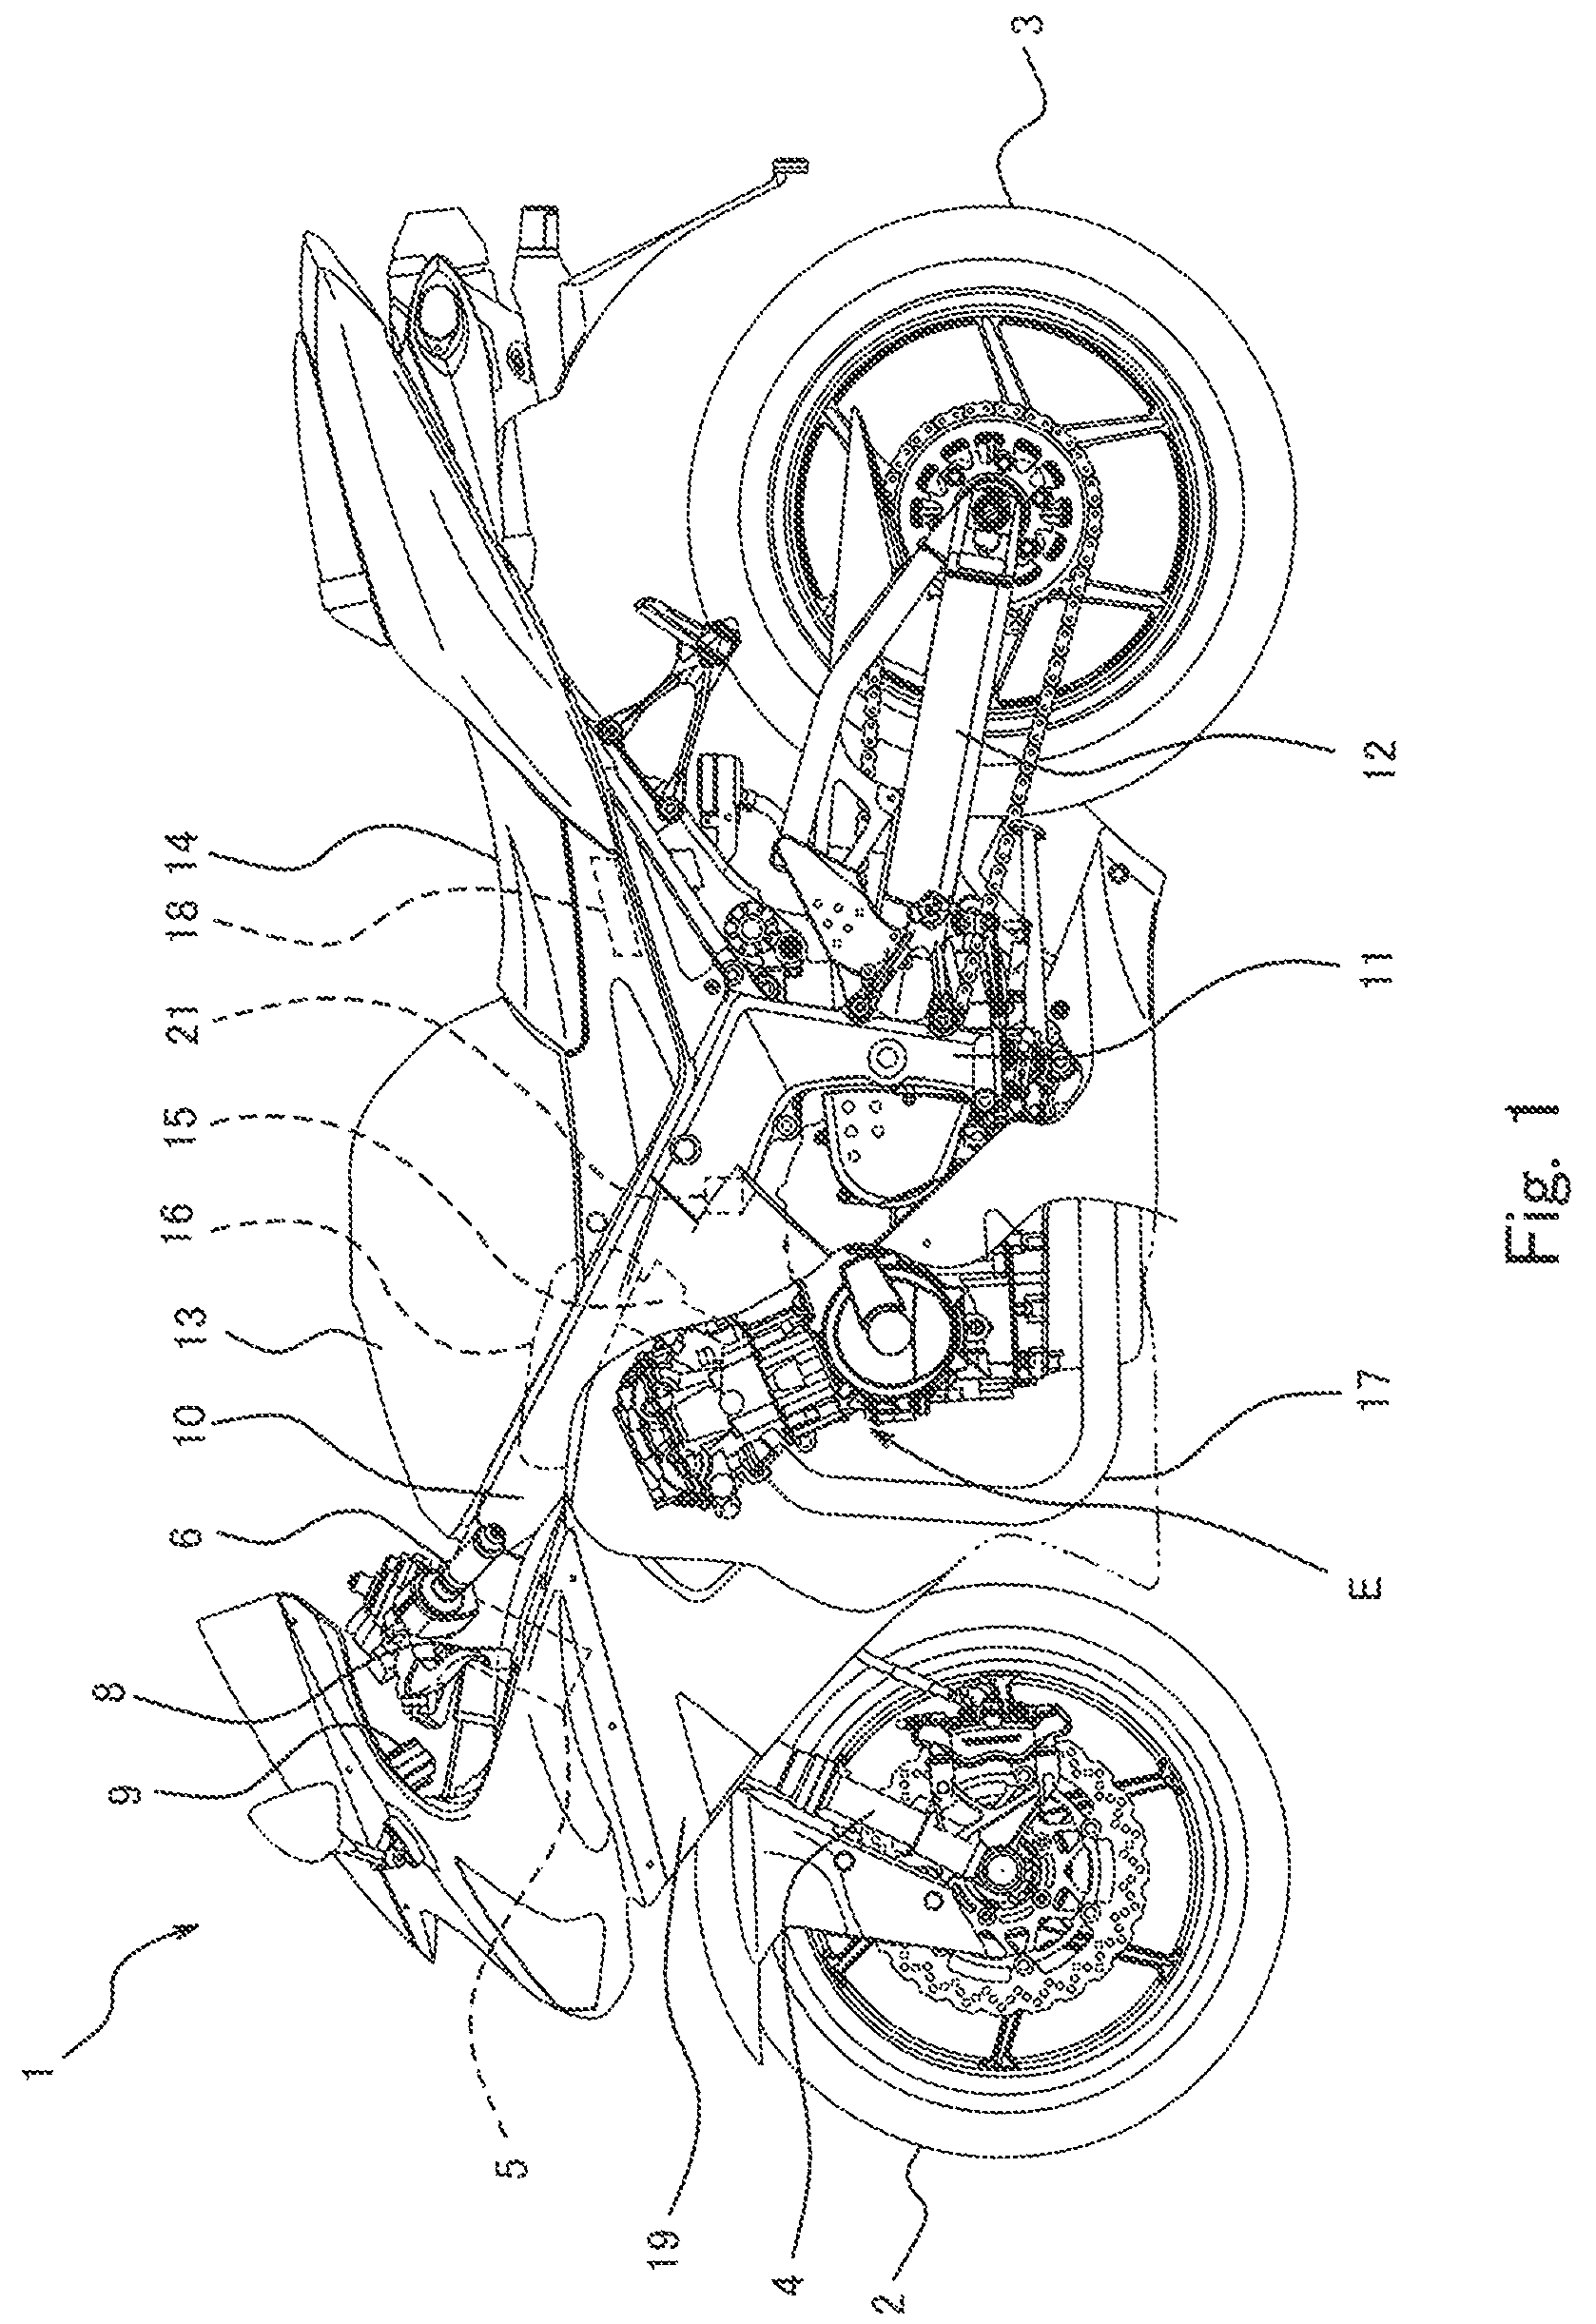 System for obtaining information in vehicle